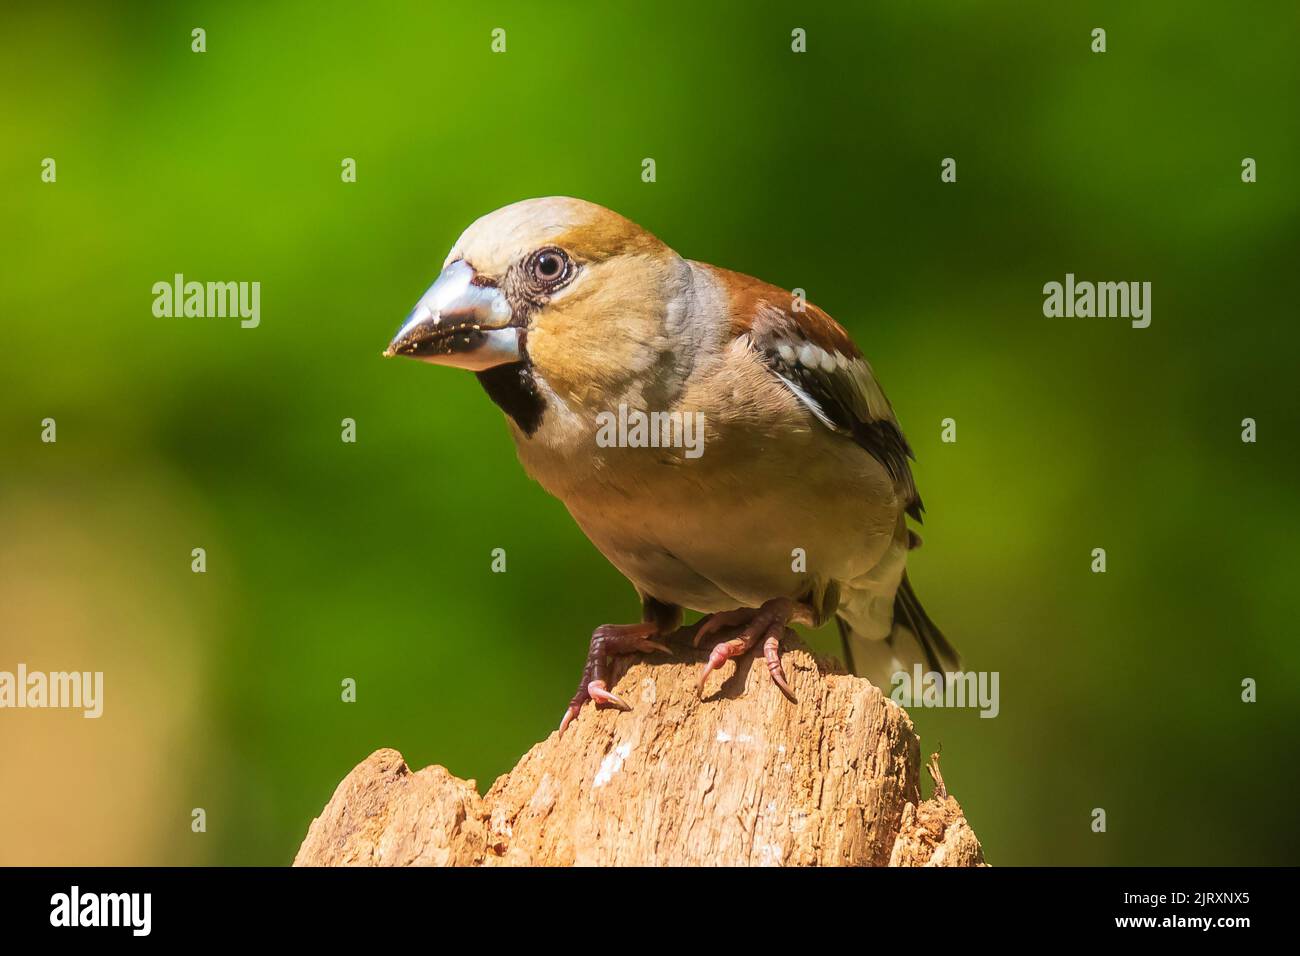 Closeup of a female hawfinch Coccothraustes coccothraustes bird perched in a forest. Selective focus and natural sunlight Stock Photo